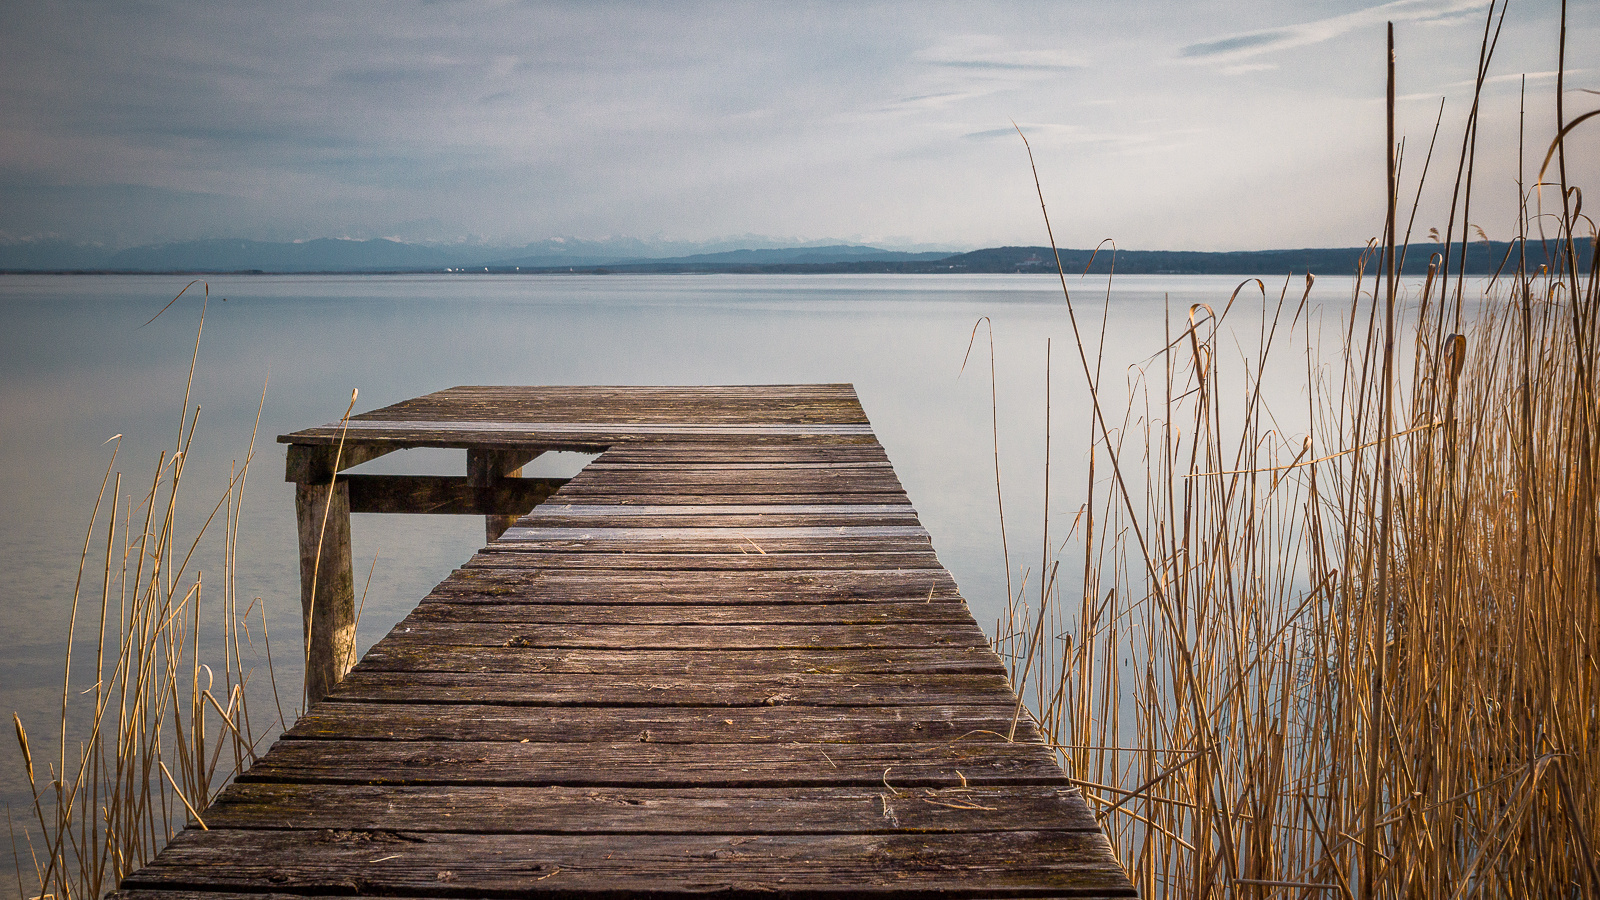 ammersee #2